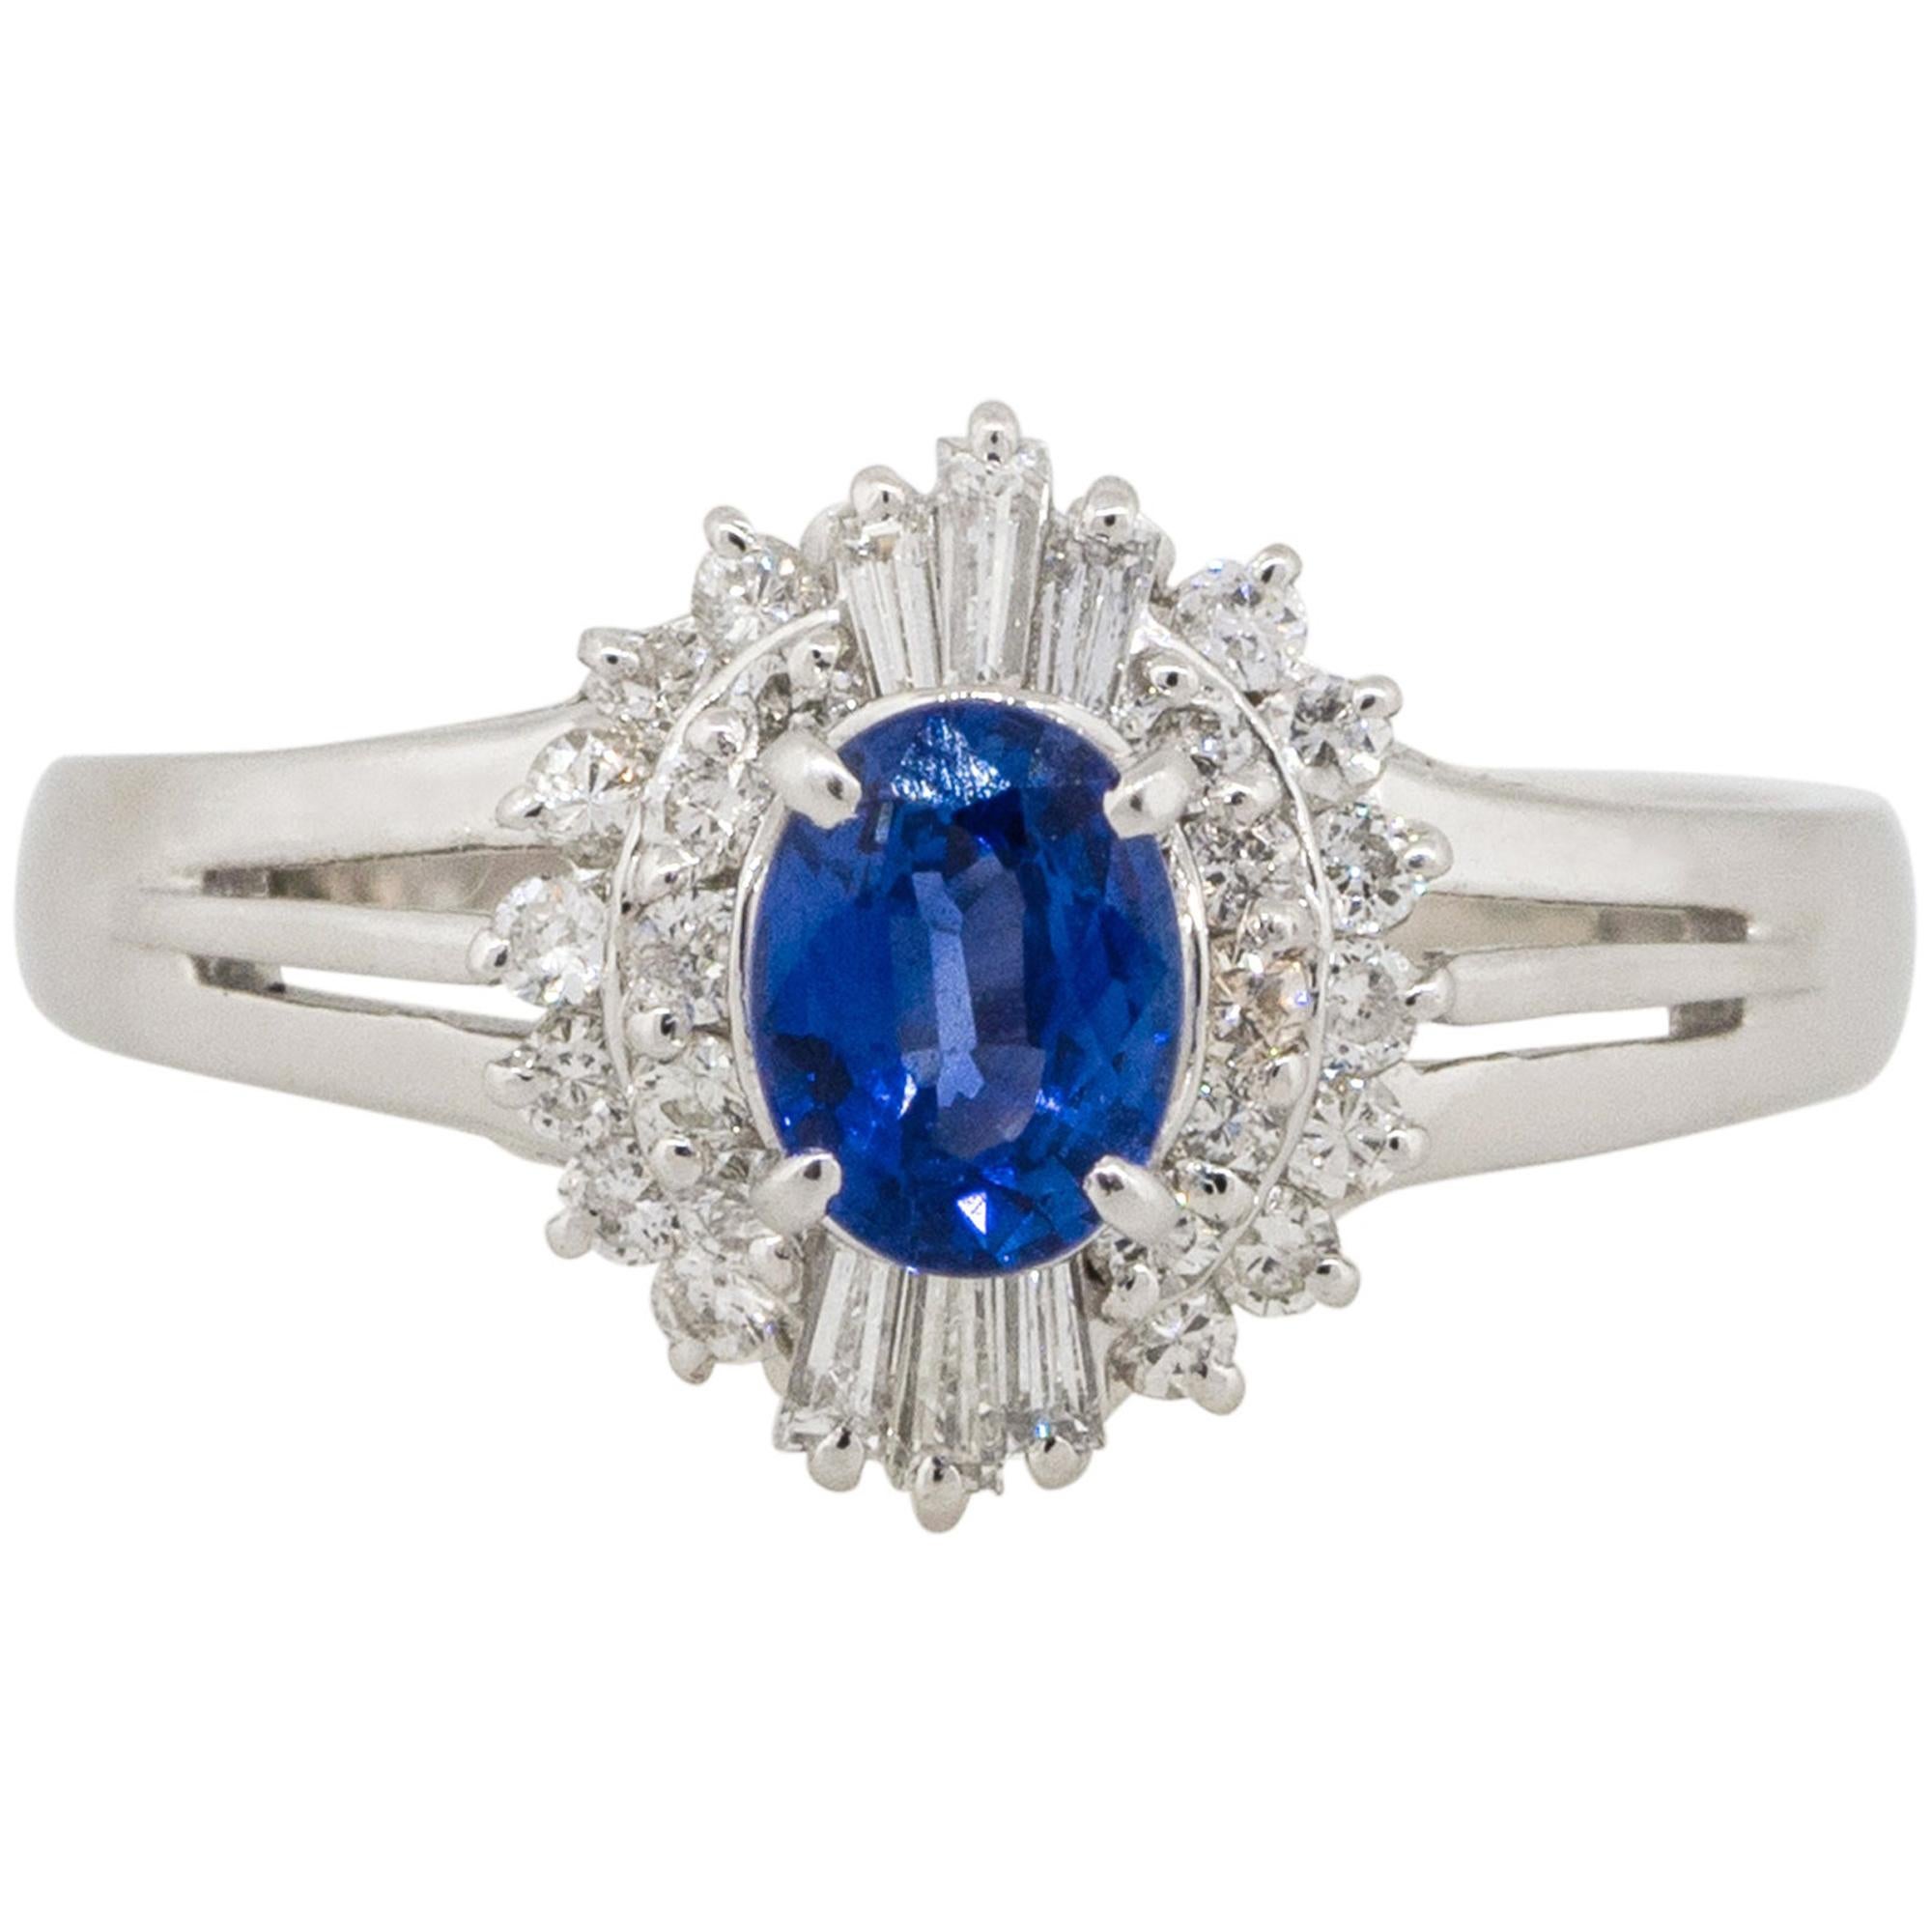 0.52 Carat Oval Sapphire Center Diamond Cocktail Ring Platinum in Stock For Sale